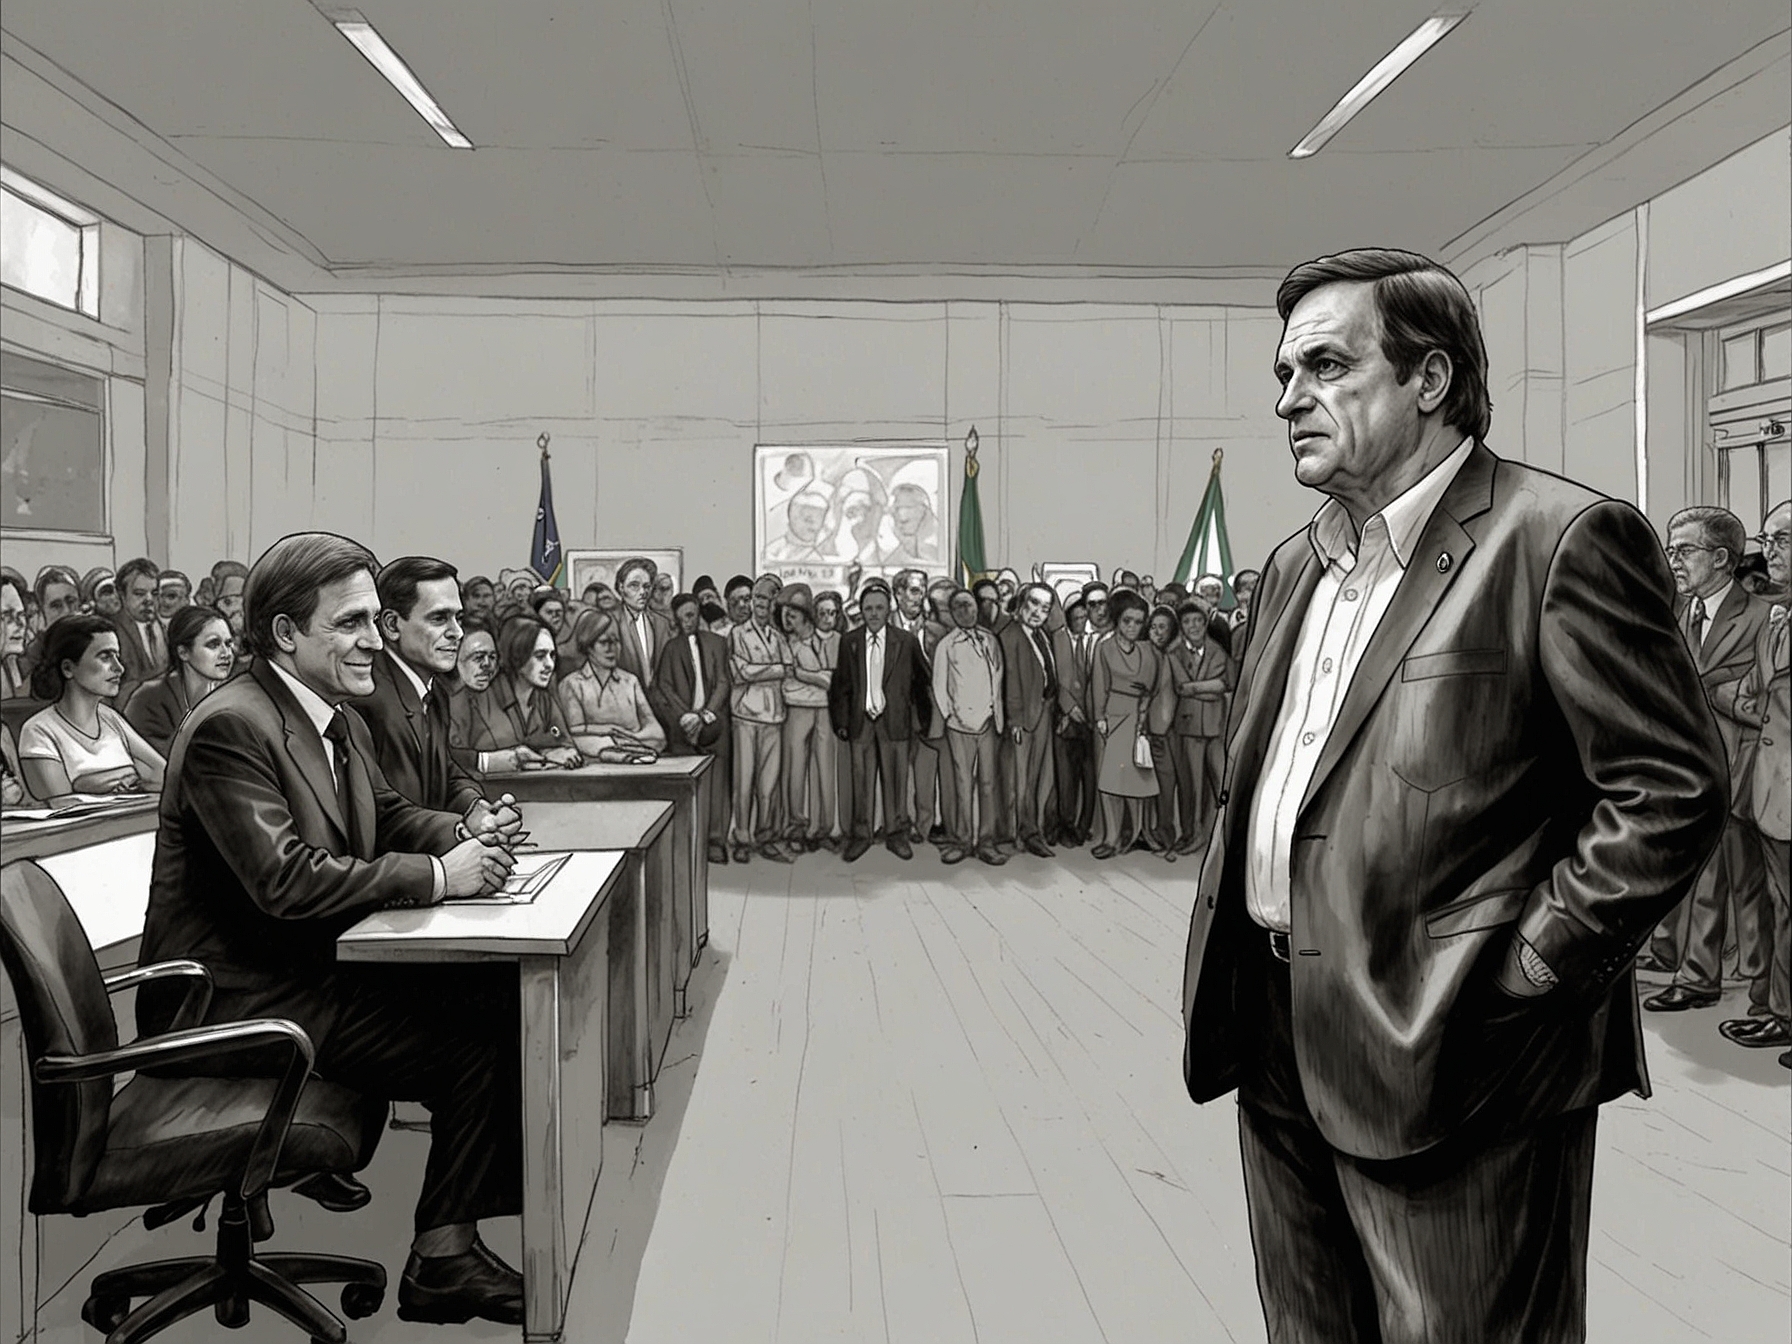 Illustration of contrasting scenes: Milei participating in a lively pro-Bolsonaro rally on one side, while a meeting room with President Lula da Silva remains empty on the other, highlighting Milei's diplomatic choice.